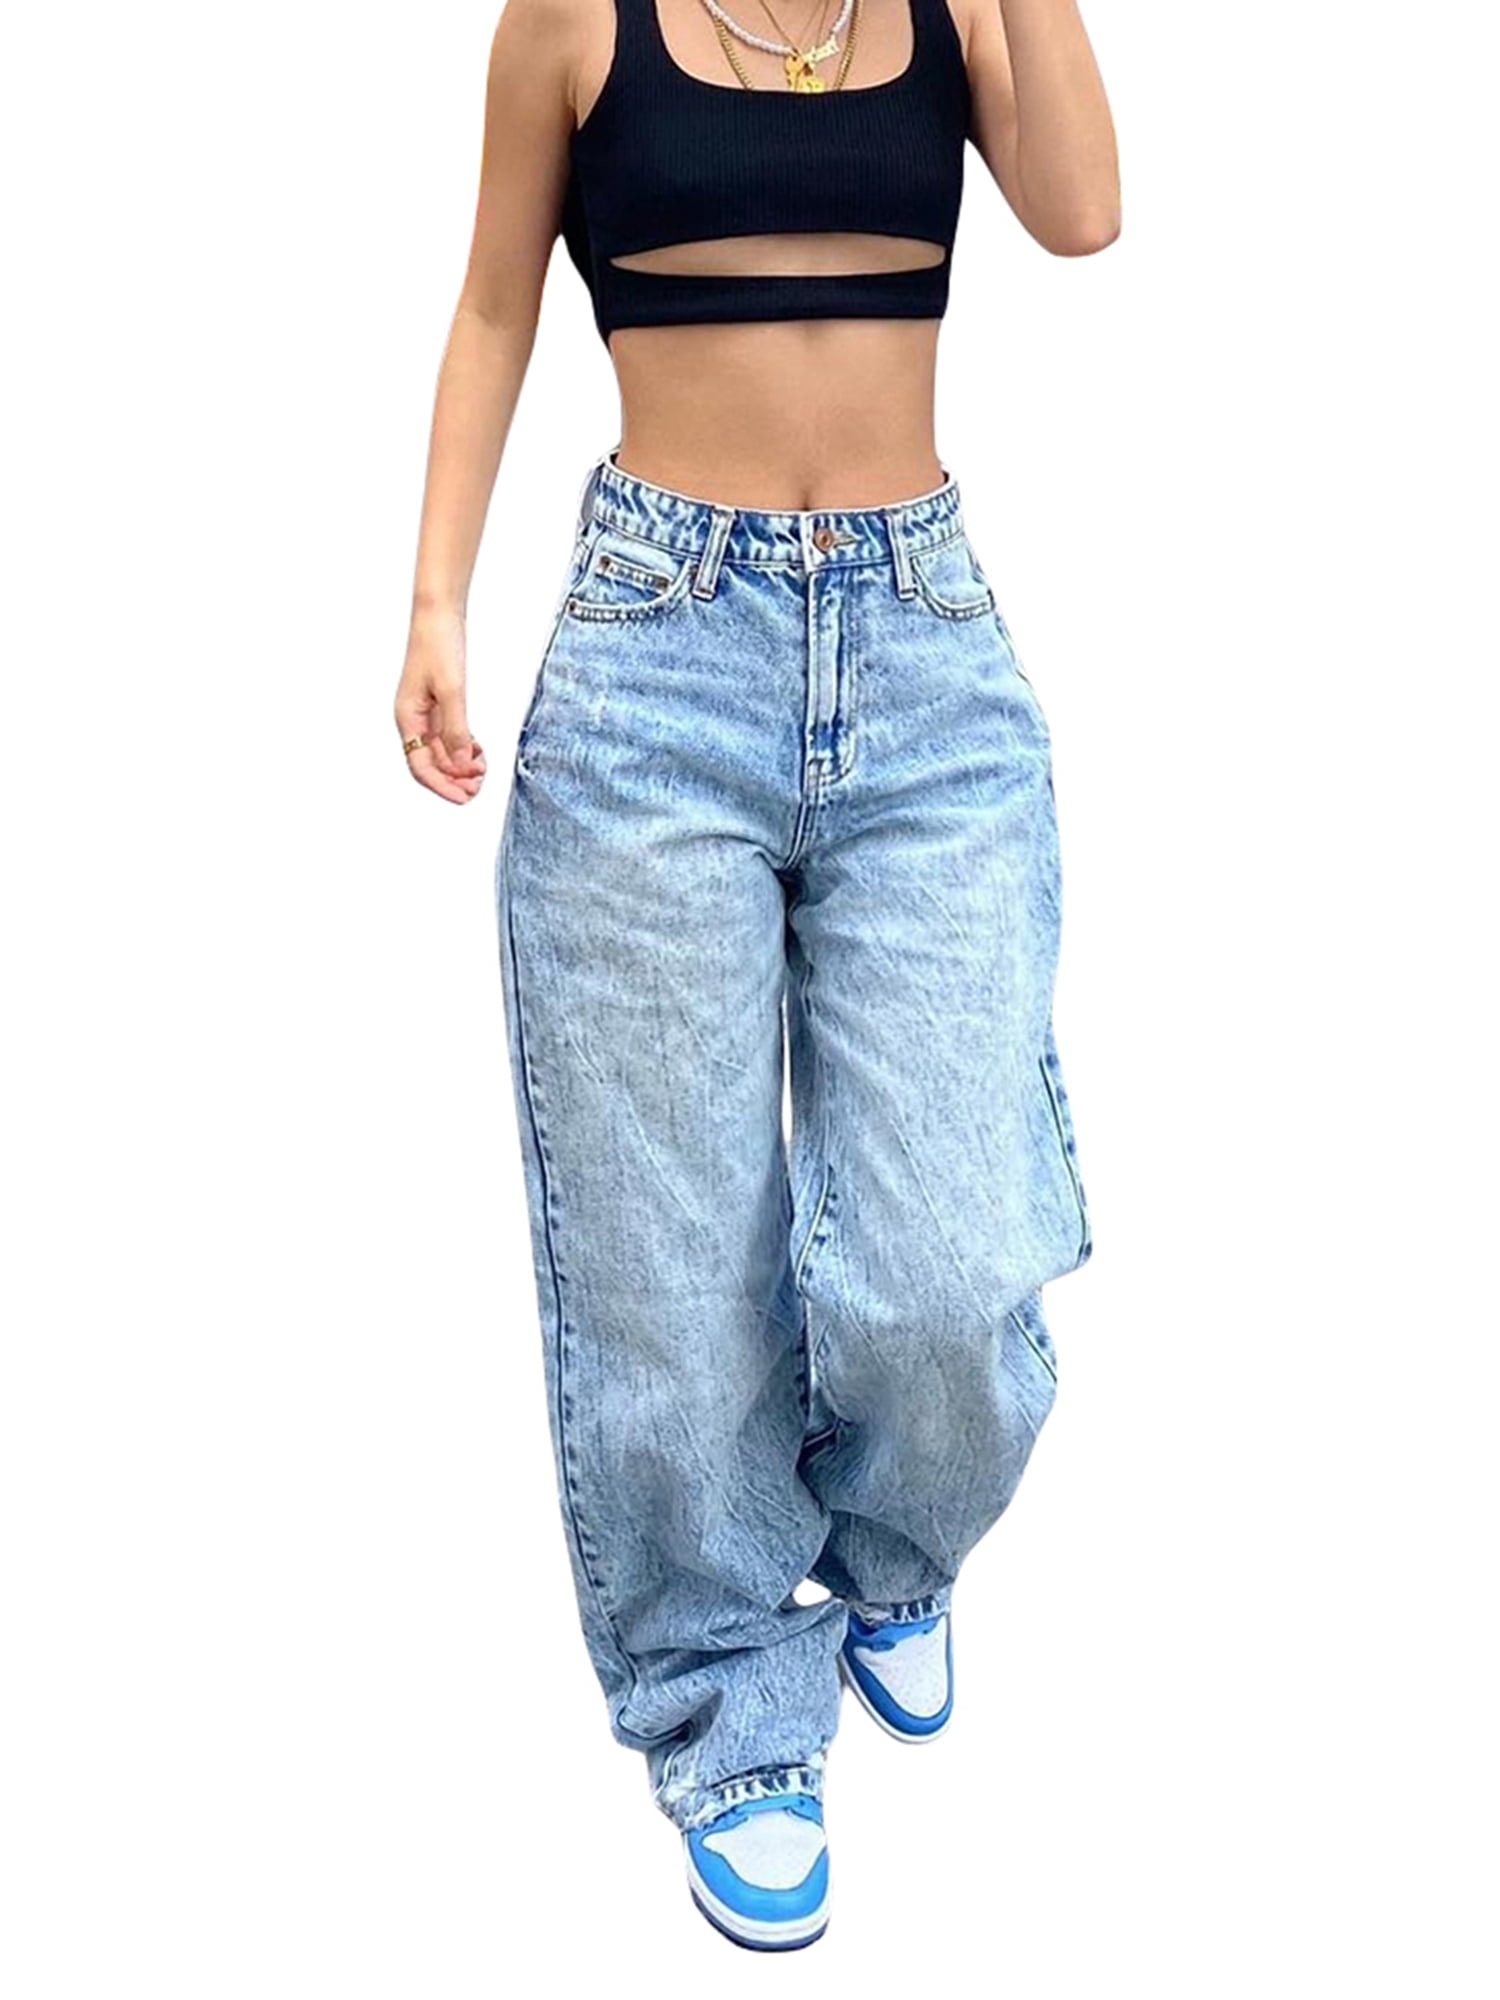 Buy D-DOLL Women Blue Washed Denim Blend Single Jeans l women jeans l  stylish jeans for women lwomen high waist jeans l straight fit jeans Online  at Best Prices in India -